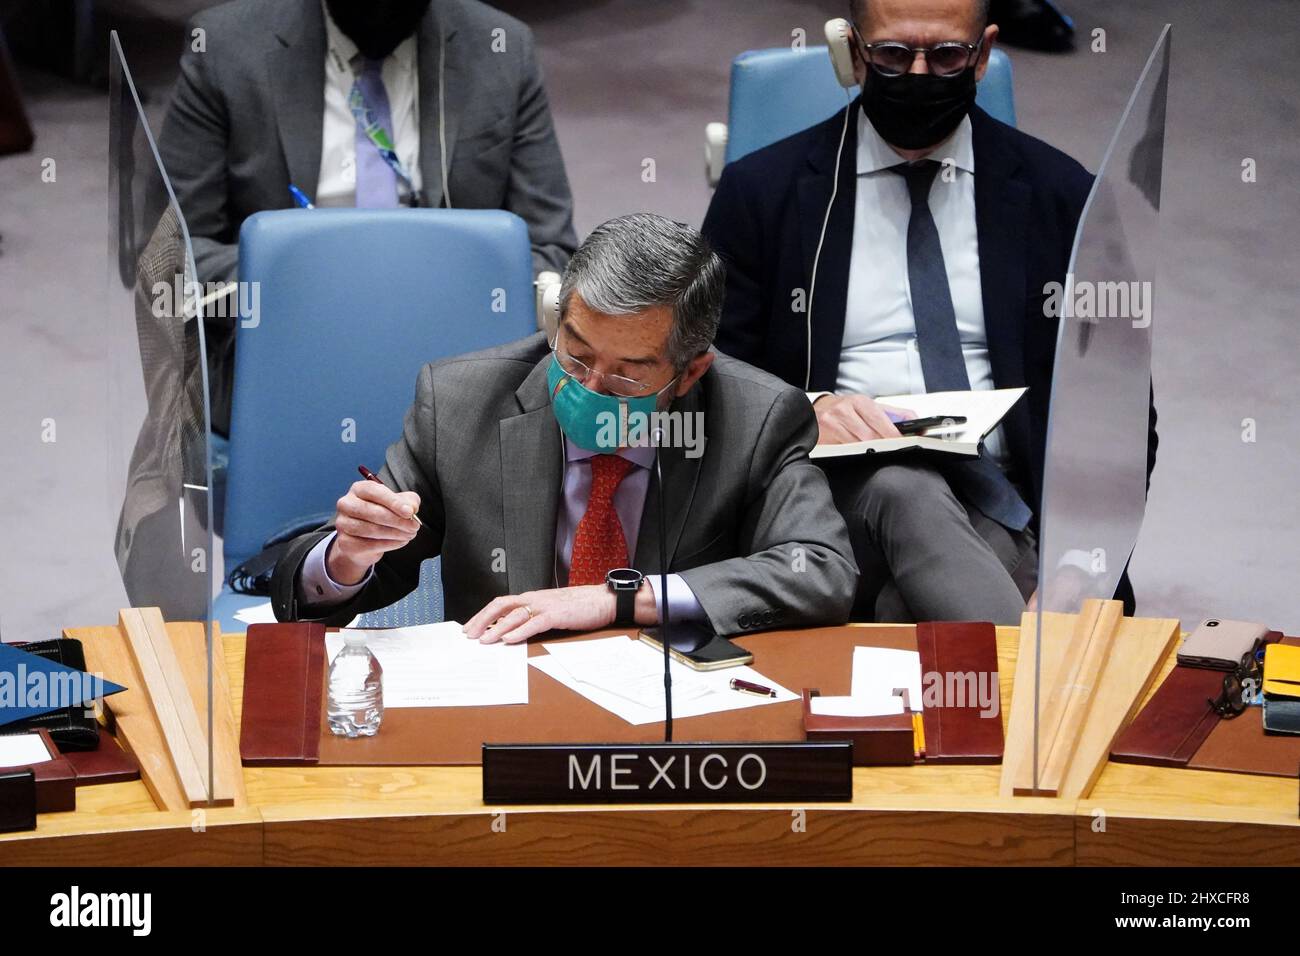 Mexico's Ambassador to the U.N. Juan Ramon de la Fuente Ramirez attends the United Nations Security Council meeting on Threats to International Peace and Security, following Russia's invasion of Ukraine, in New York City, U.S. March 11, 2022. REUTERS/Carlo Allegri Stock Photo